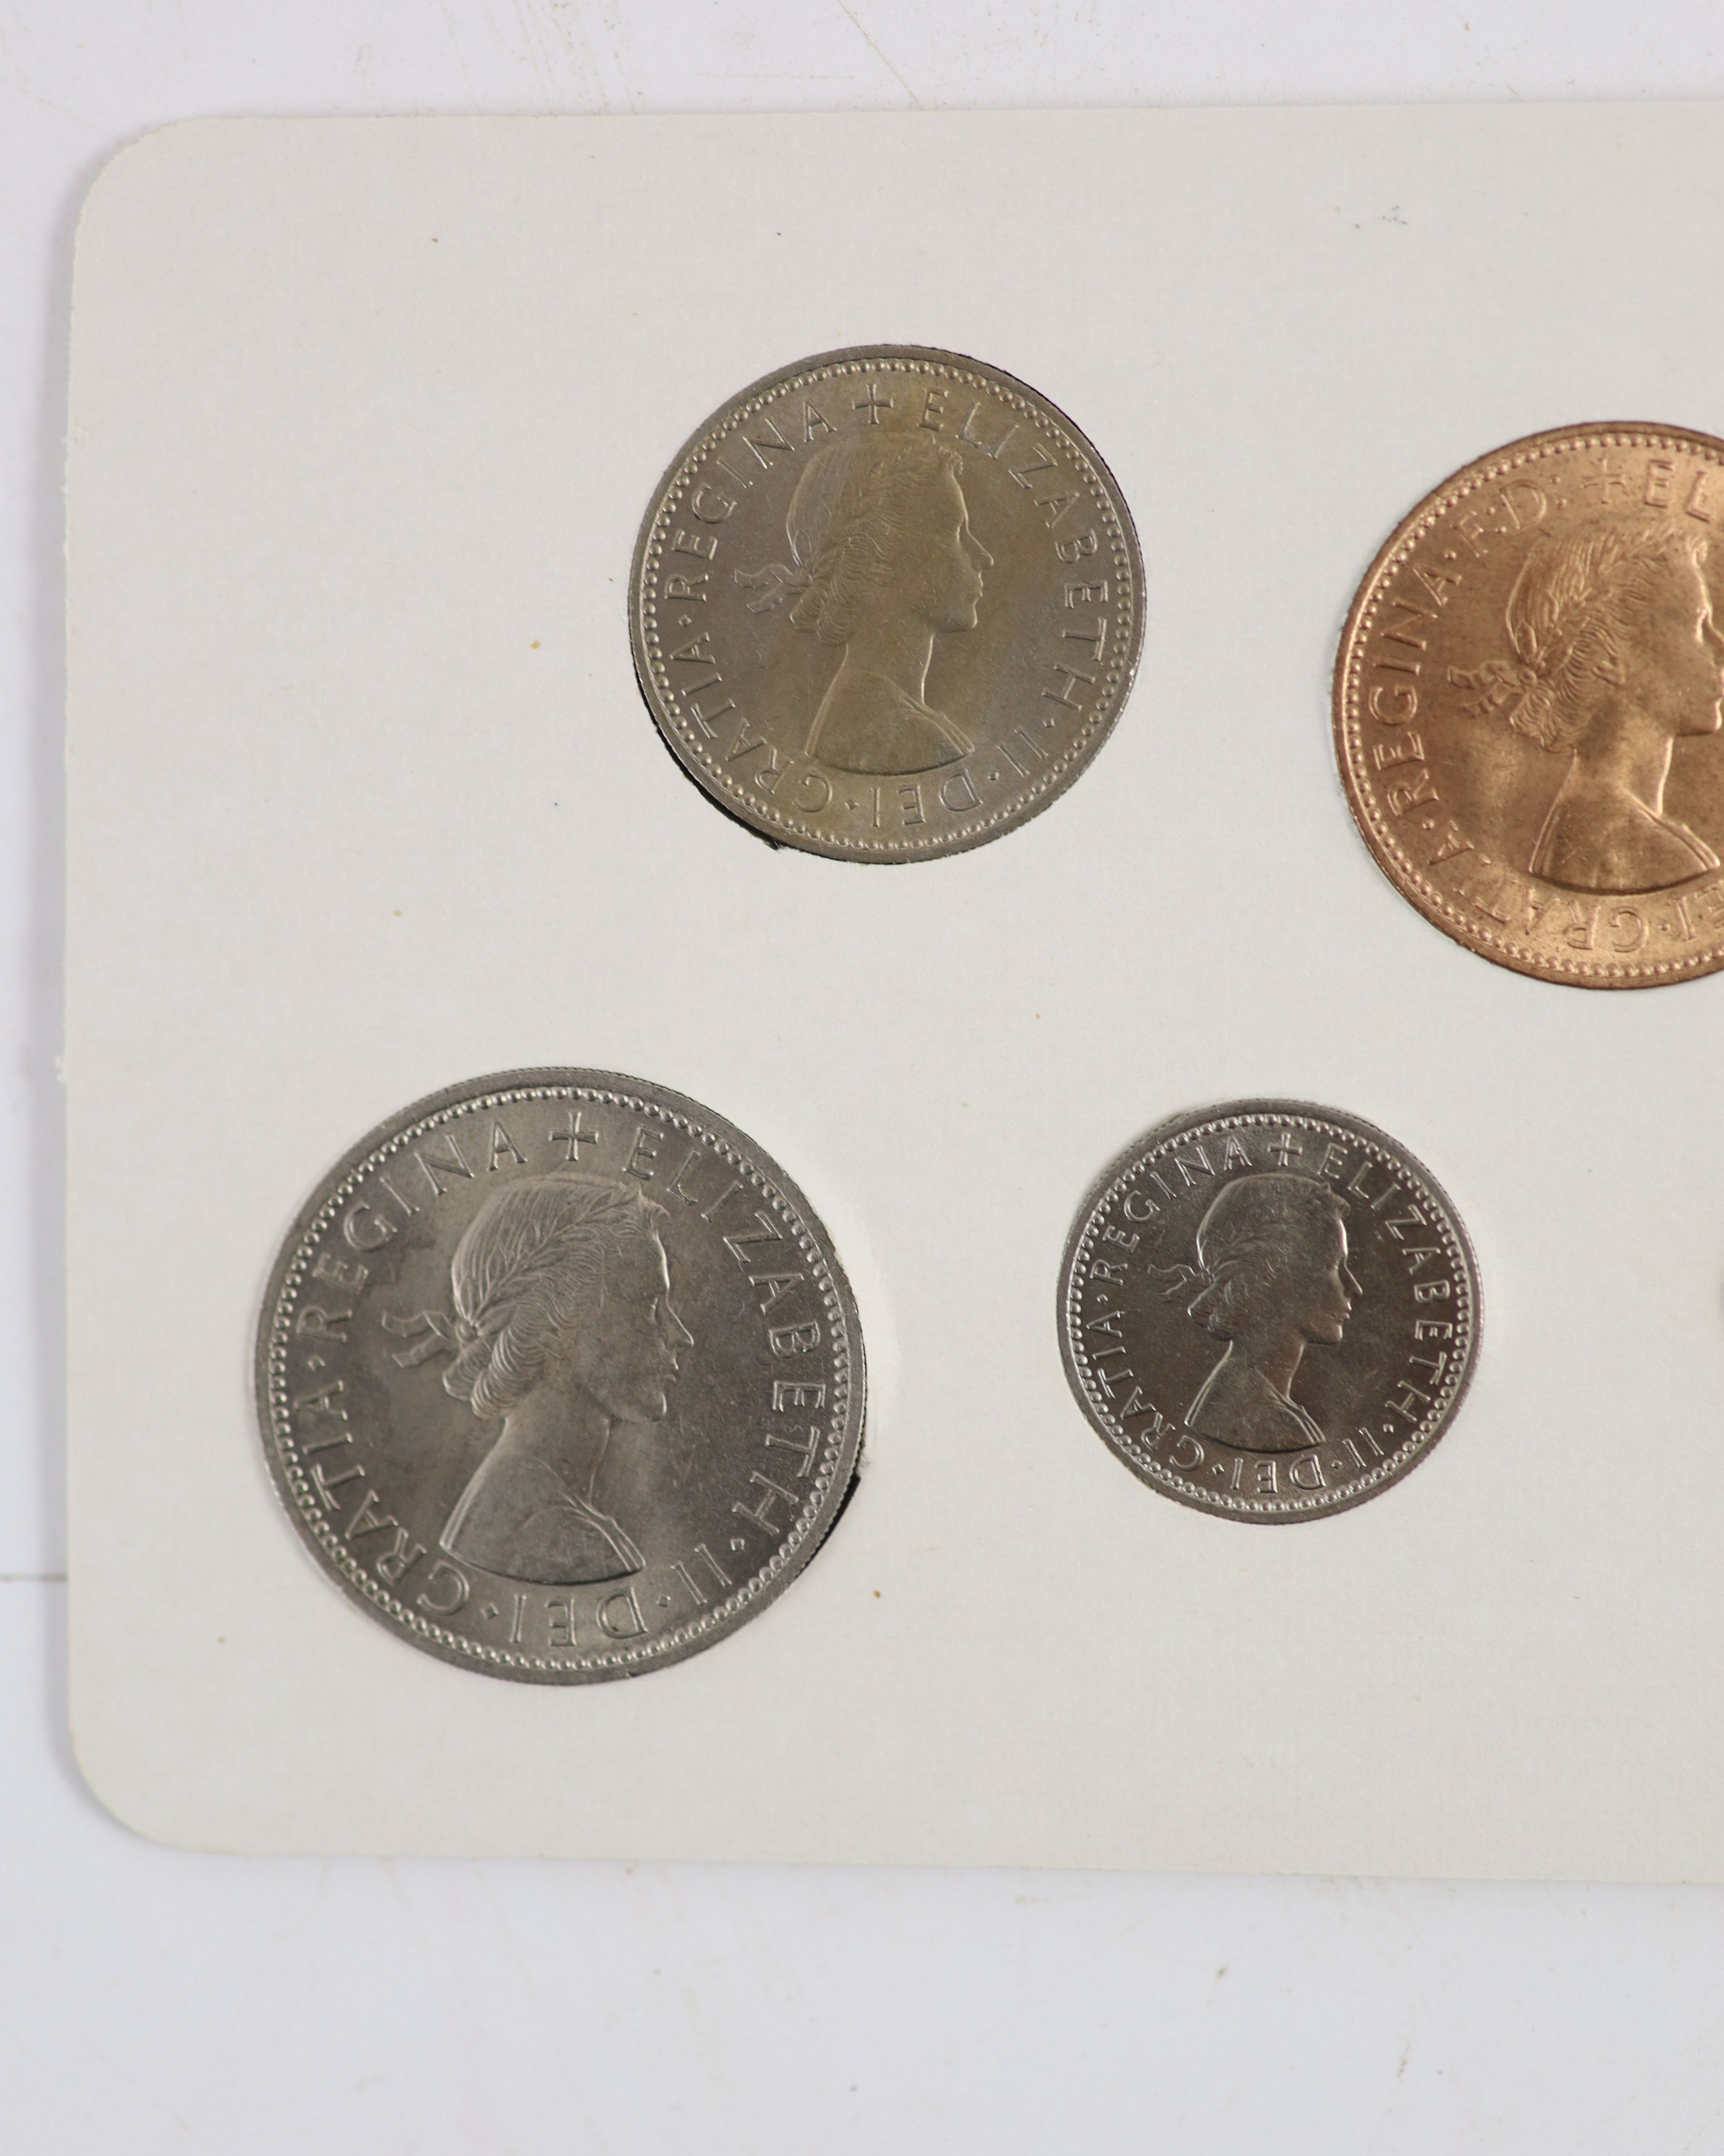 Queen Elizabeth II pre-decimal specimen coin sets for 1953 - 1967, first and second issues, all EF/ - Image 30 of 34